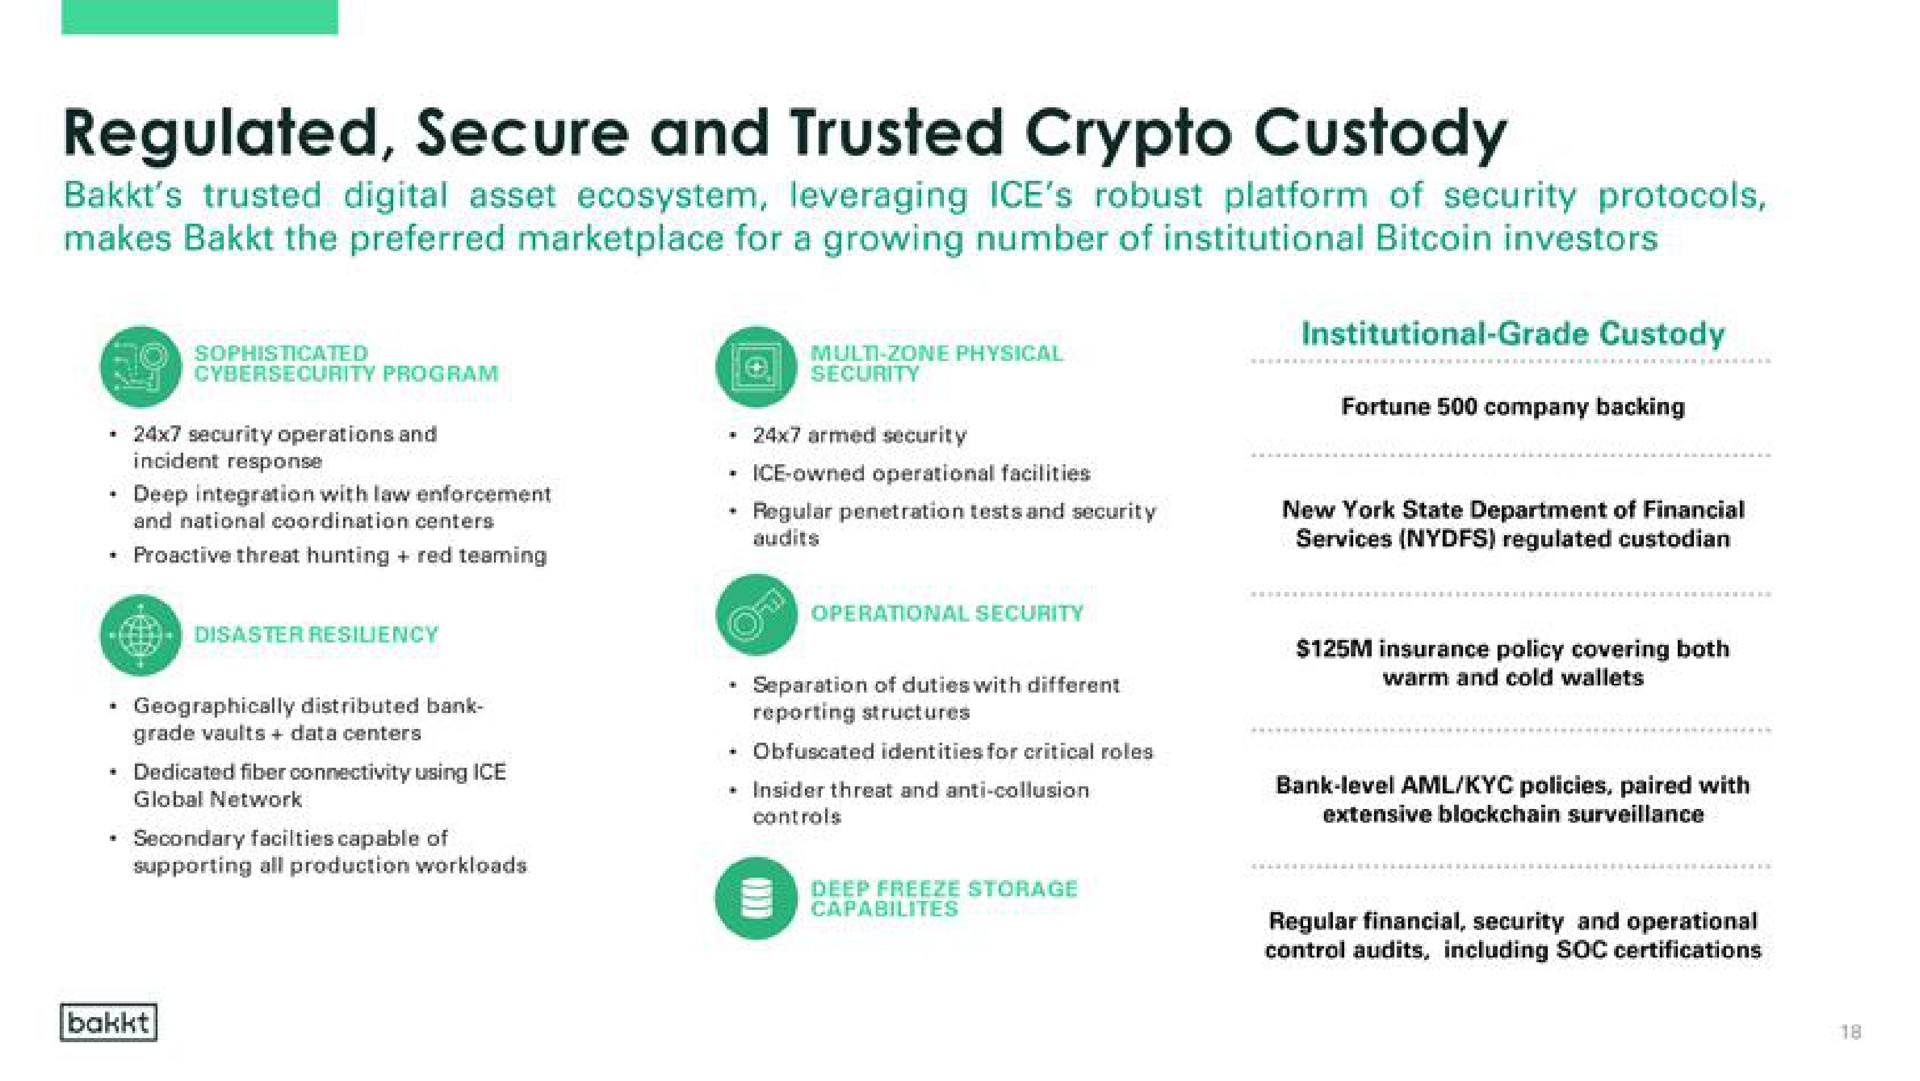 regulated secure and trusted custody | Bakkt